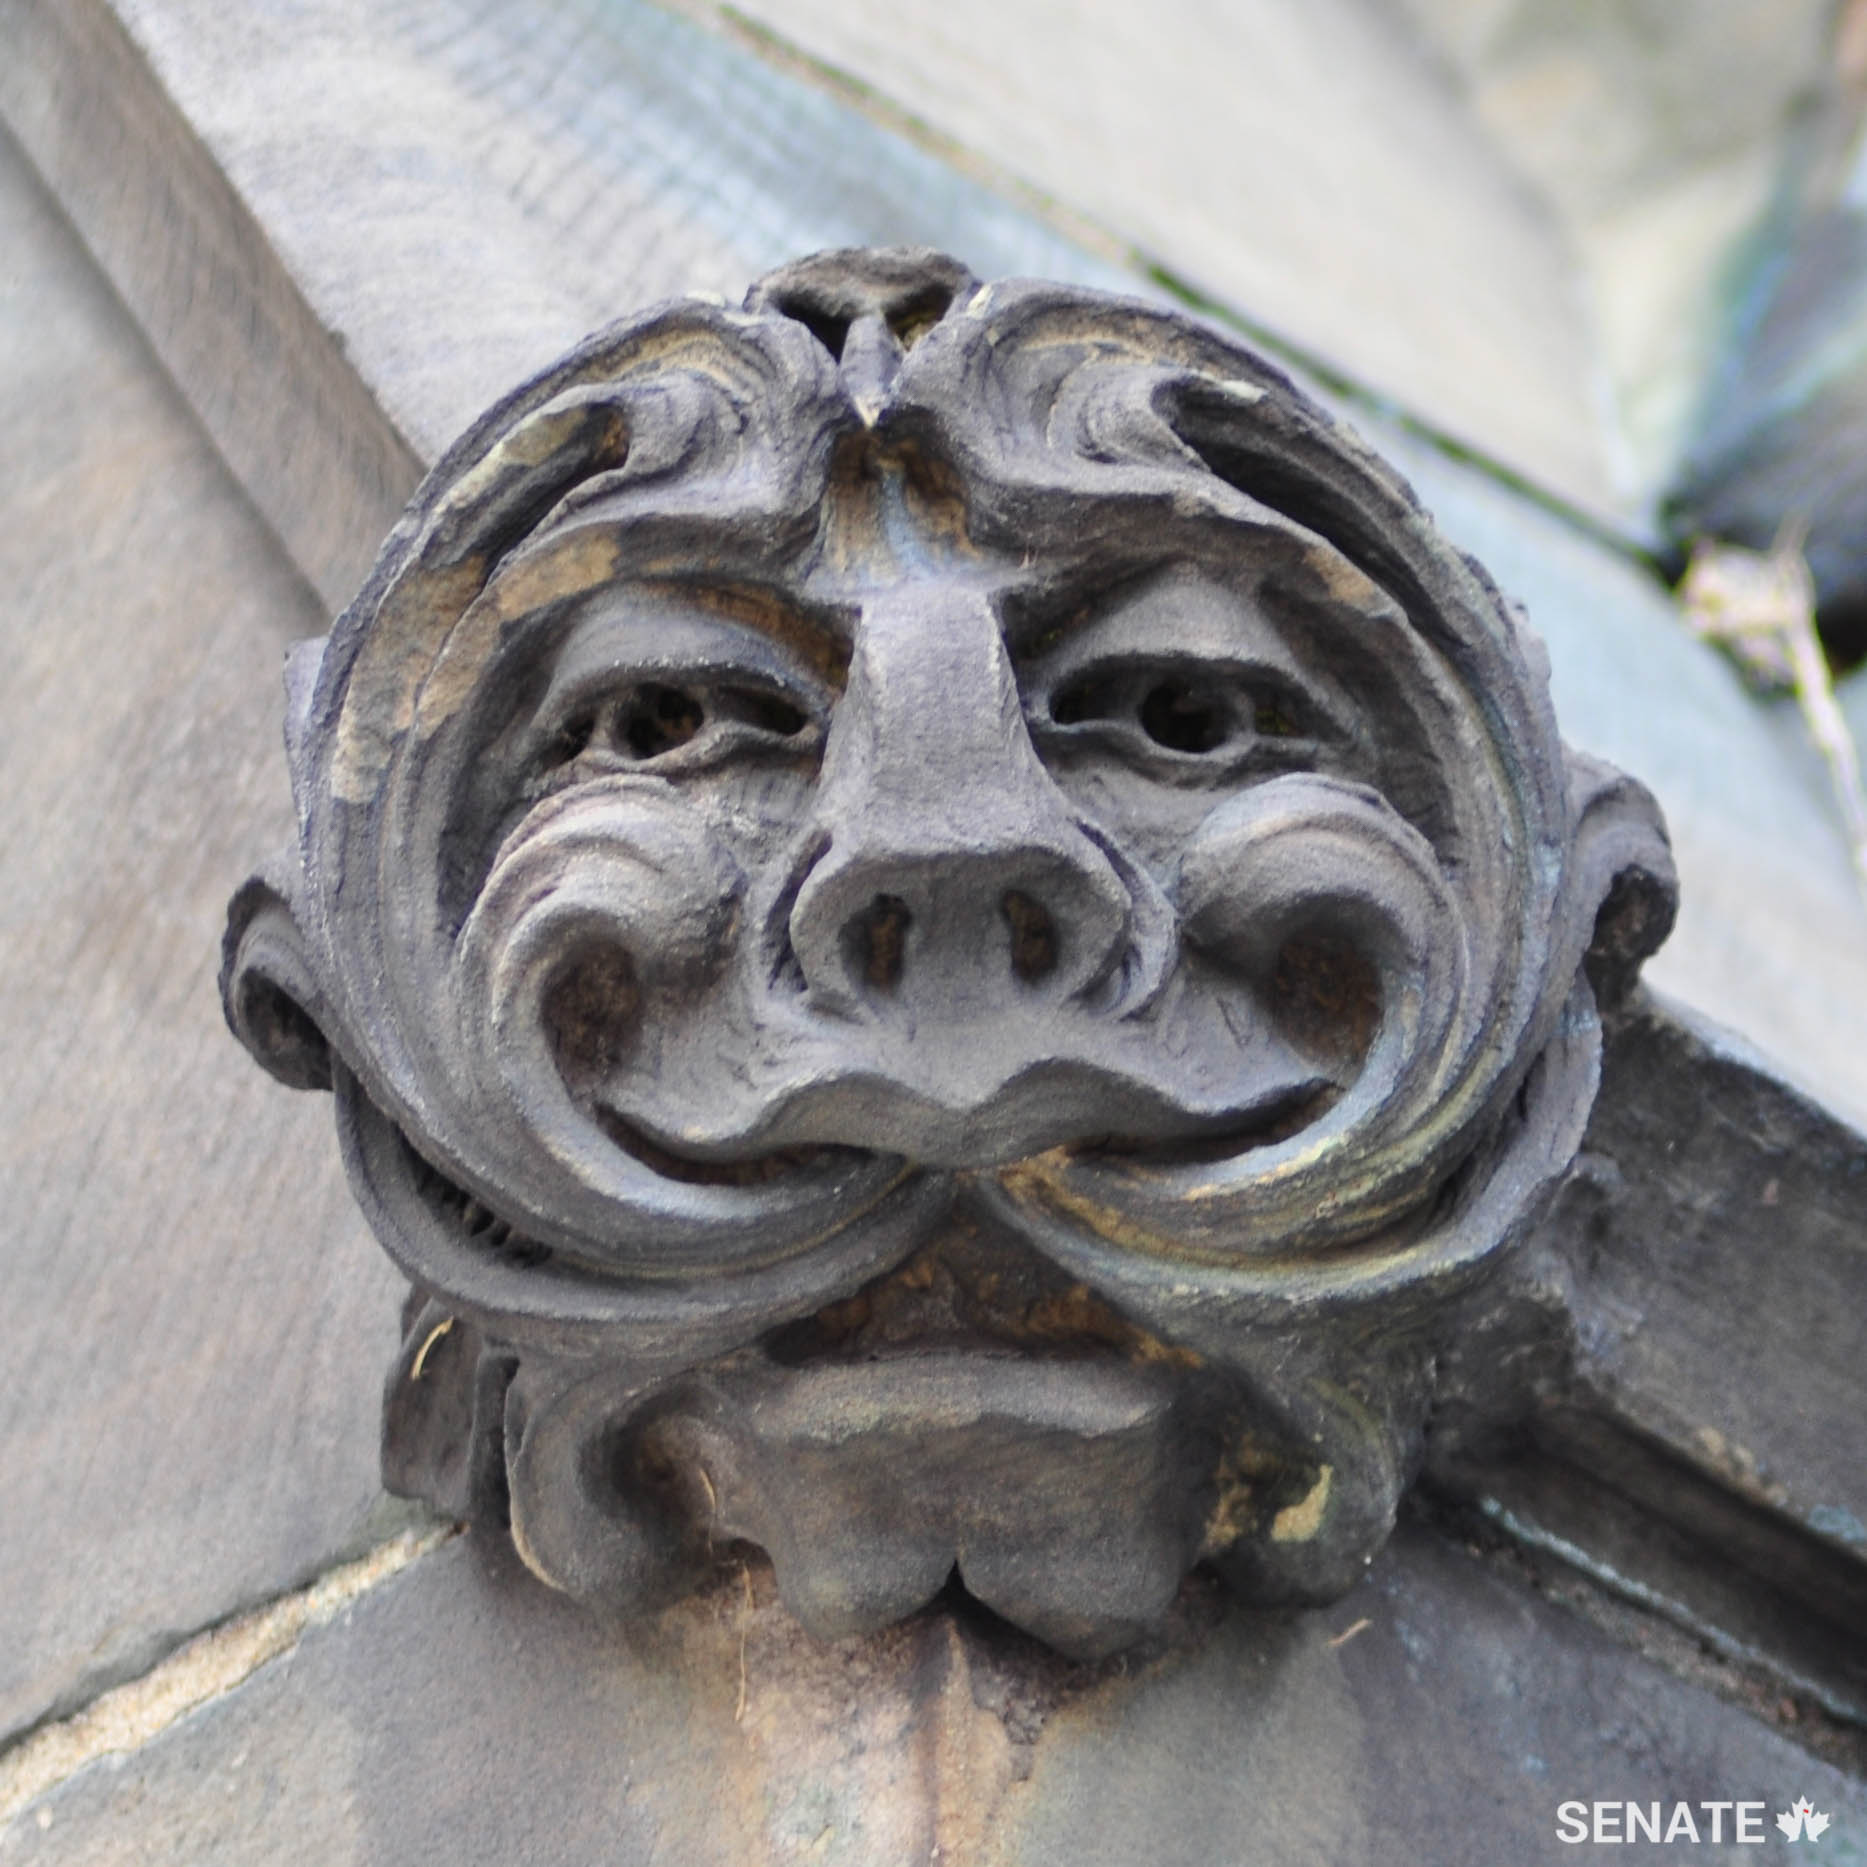 Other versions of the Green Man follow medieval conventions more closely.